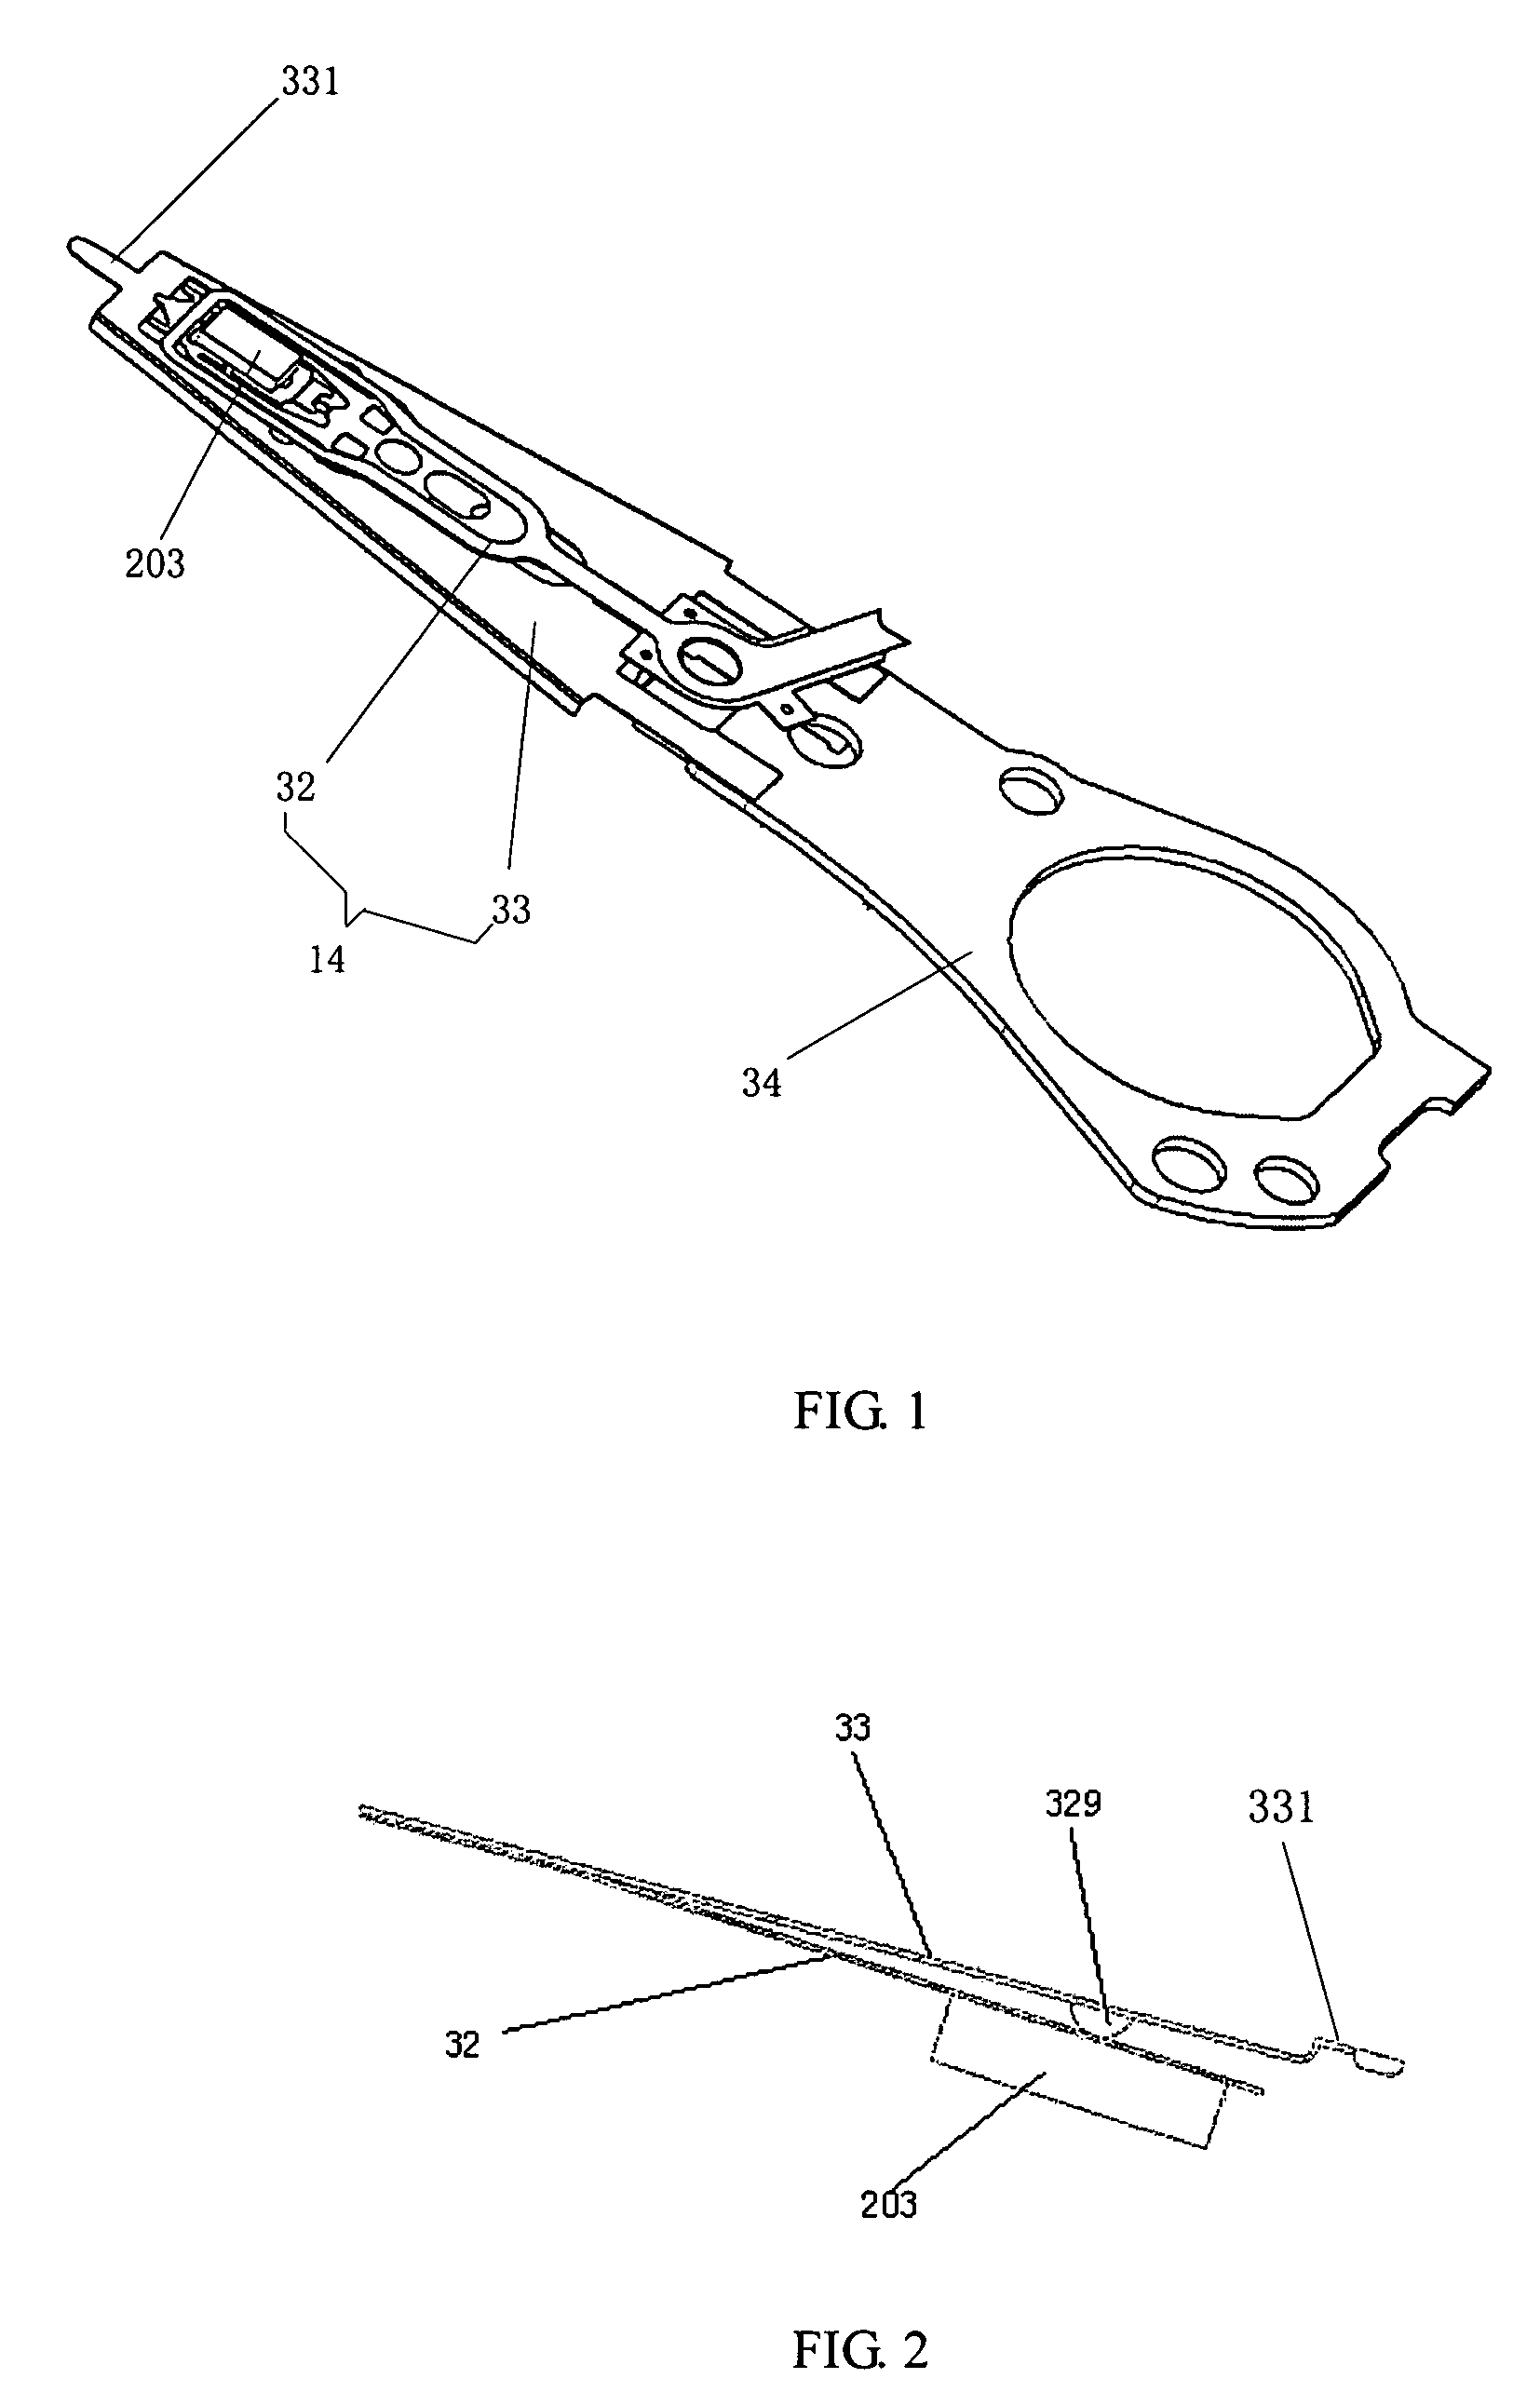 Head gimbal assembly including a one-piece structural suspension and an accessory plate, and method of manufacturing the same